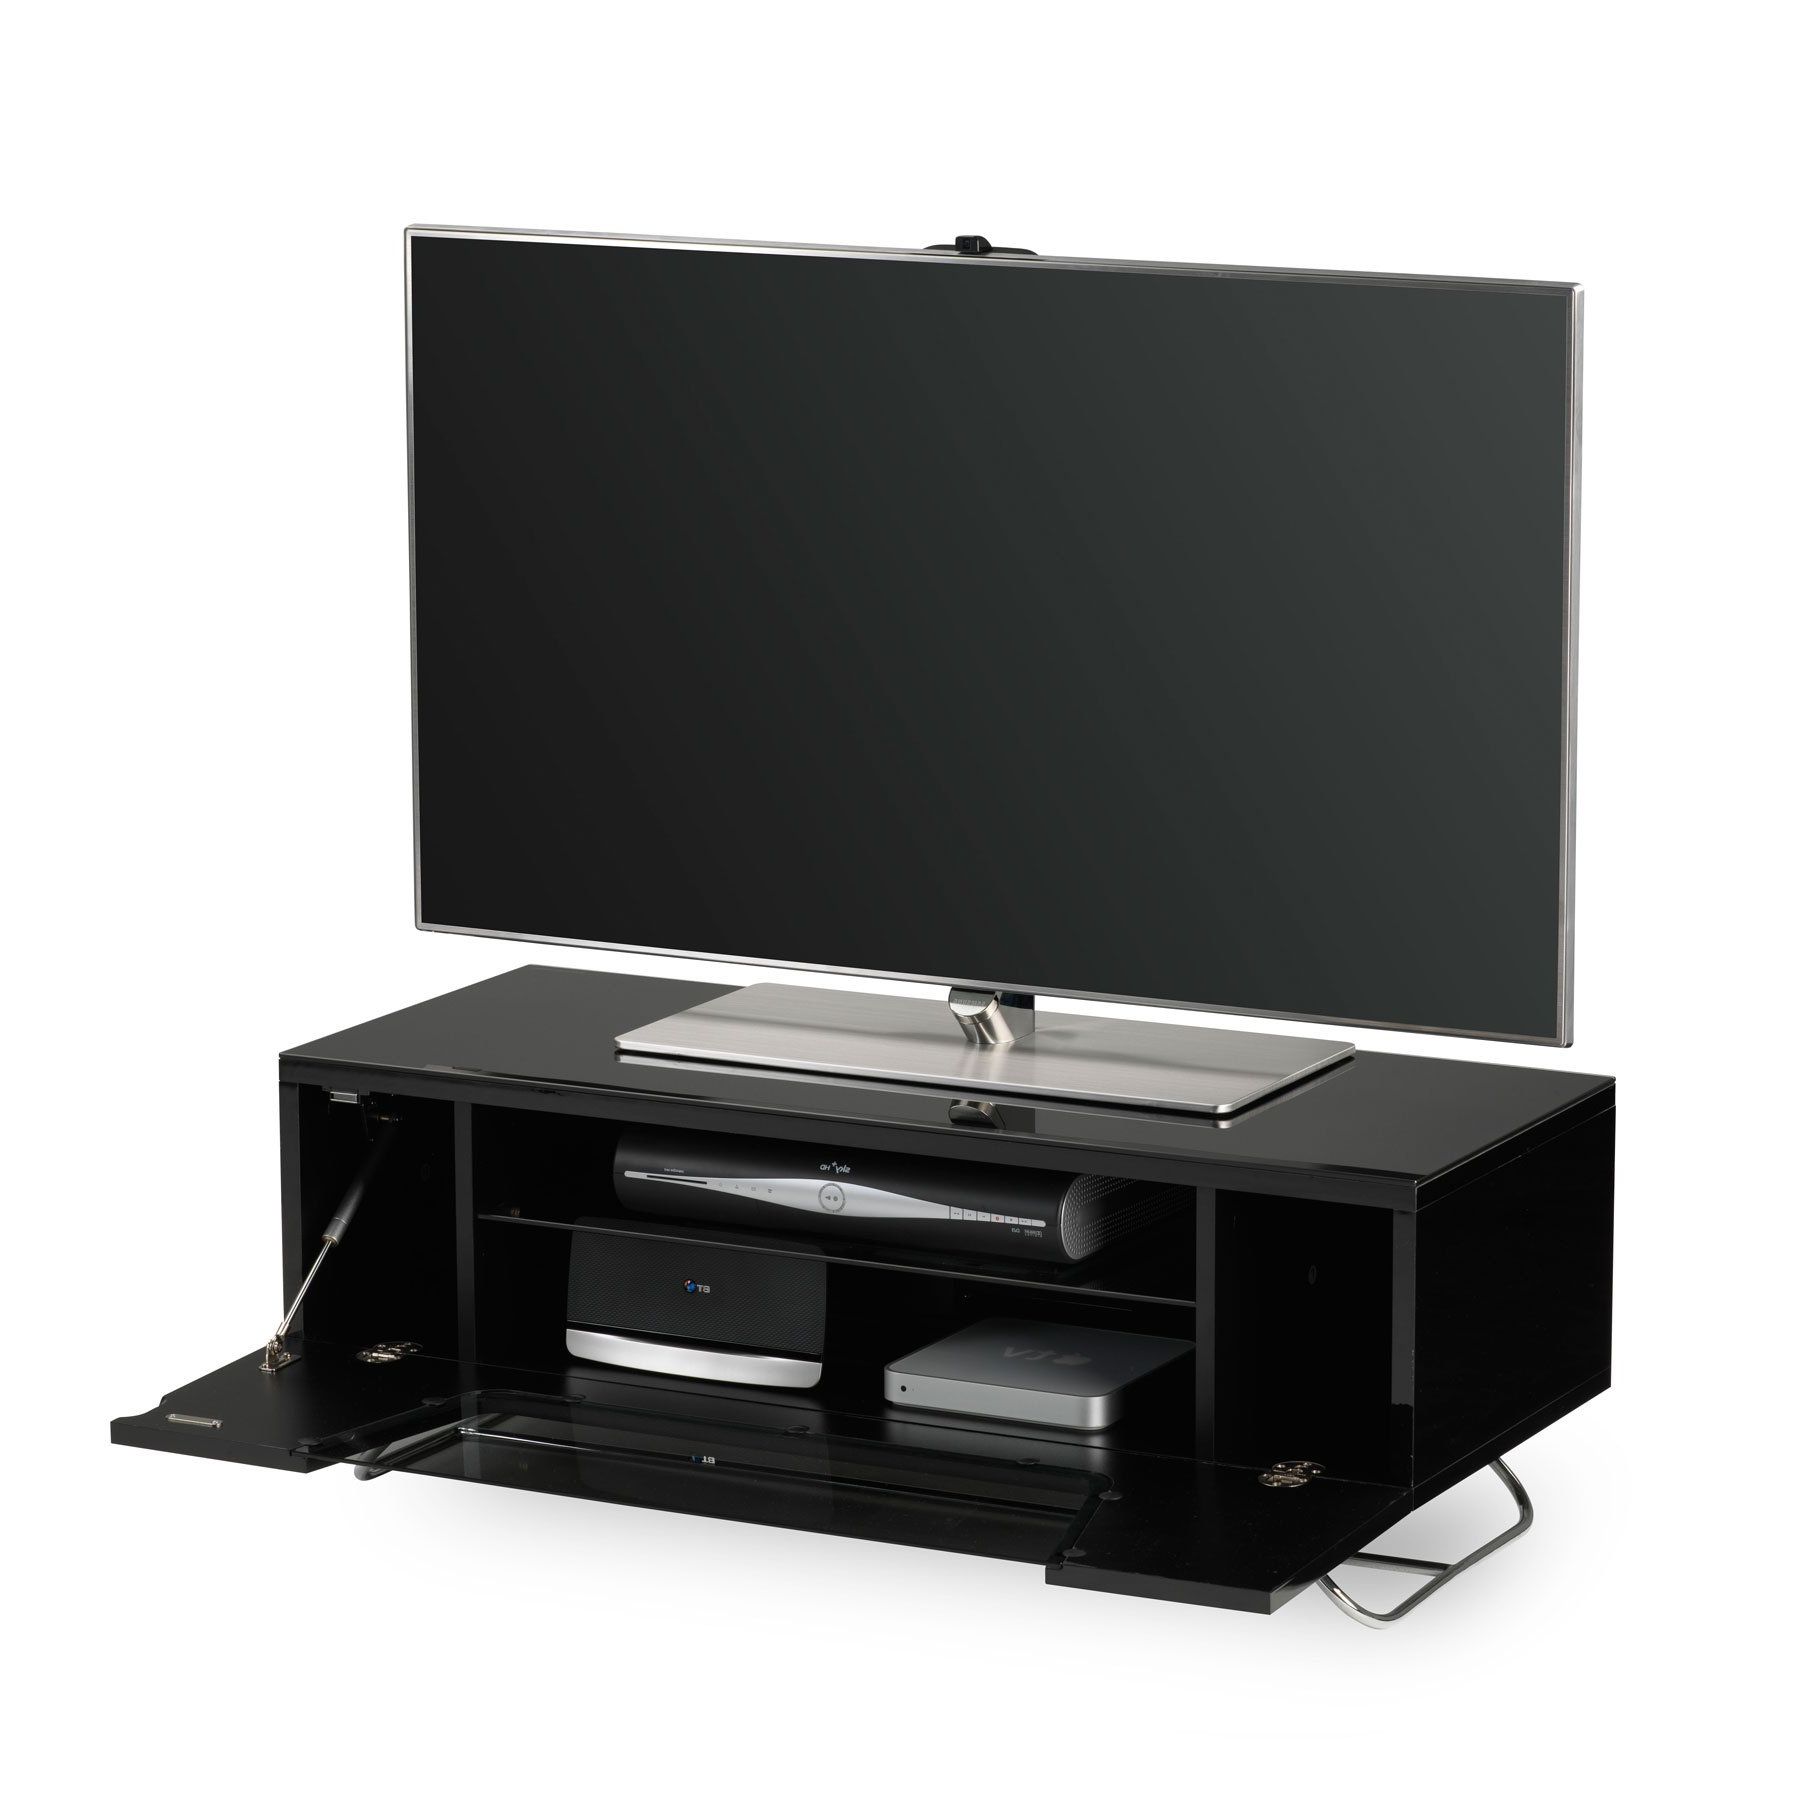 Allegra Tv Stands For Tvs Up To 50" With Regard To Most Current Alphason Chromium 2 100cm Black Tv Stand For Up To 50" Tvs (View 21 of 25)